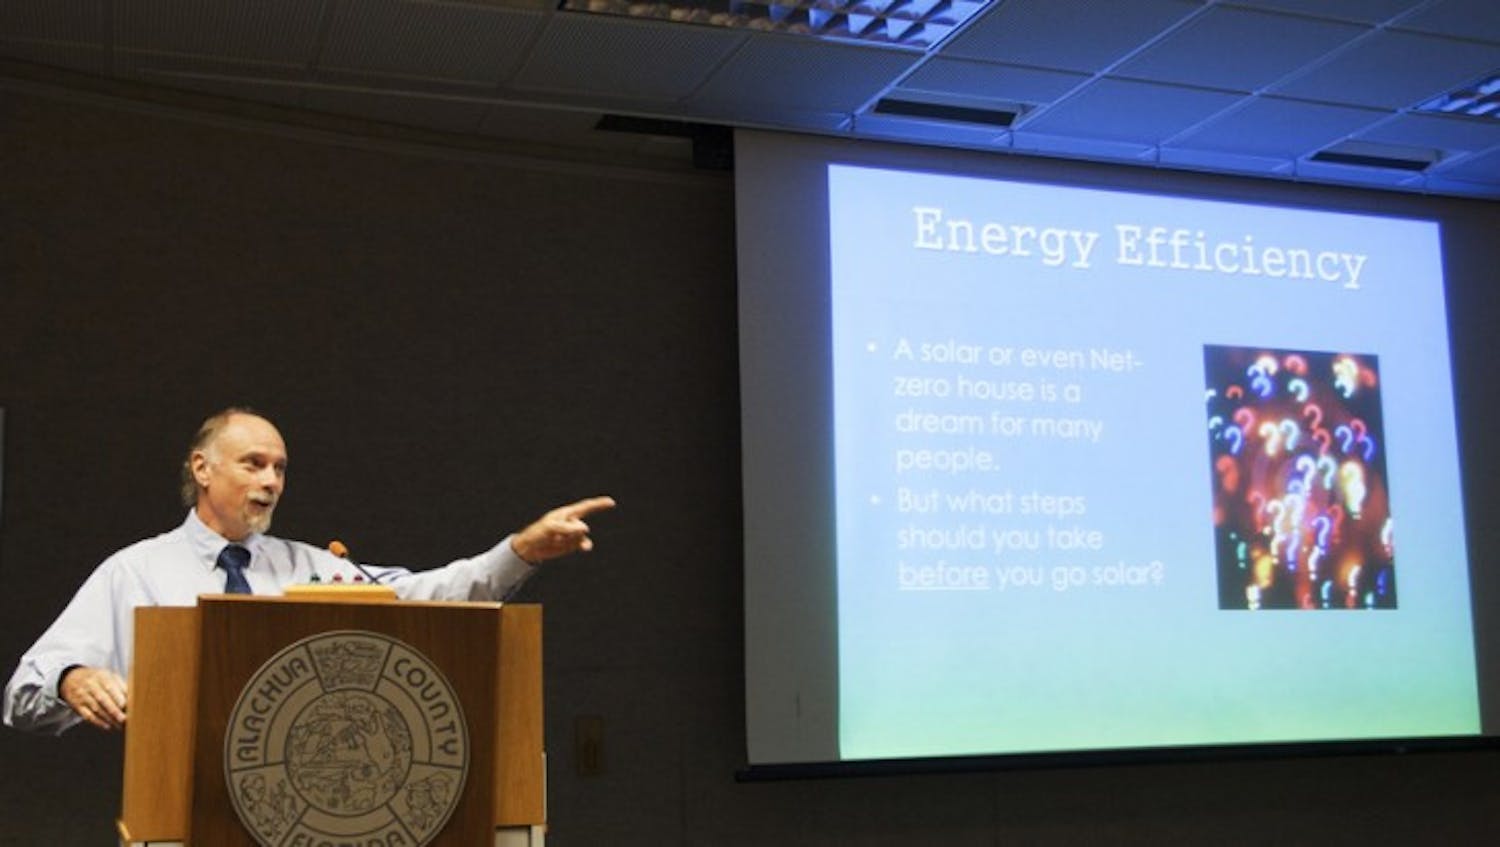 Kevin Veach, owner of Green Energy Options, chooses a member of the audience to answer on the sexiness of energy efficiency at a solar energy and efficiency workshop at the Alachua County Administration building Saturday morning.